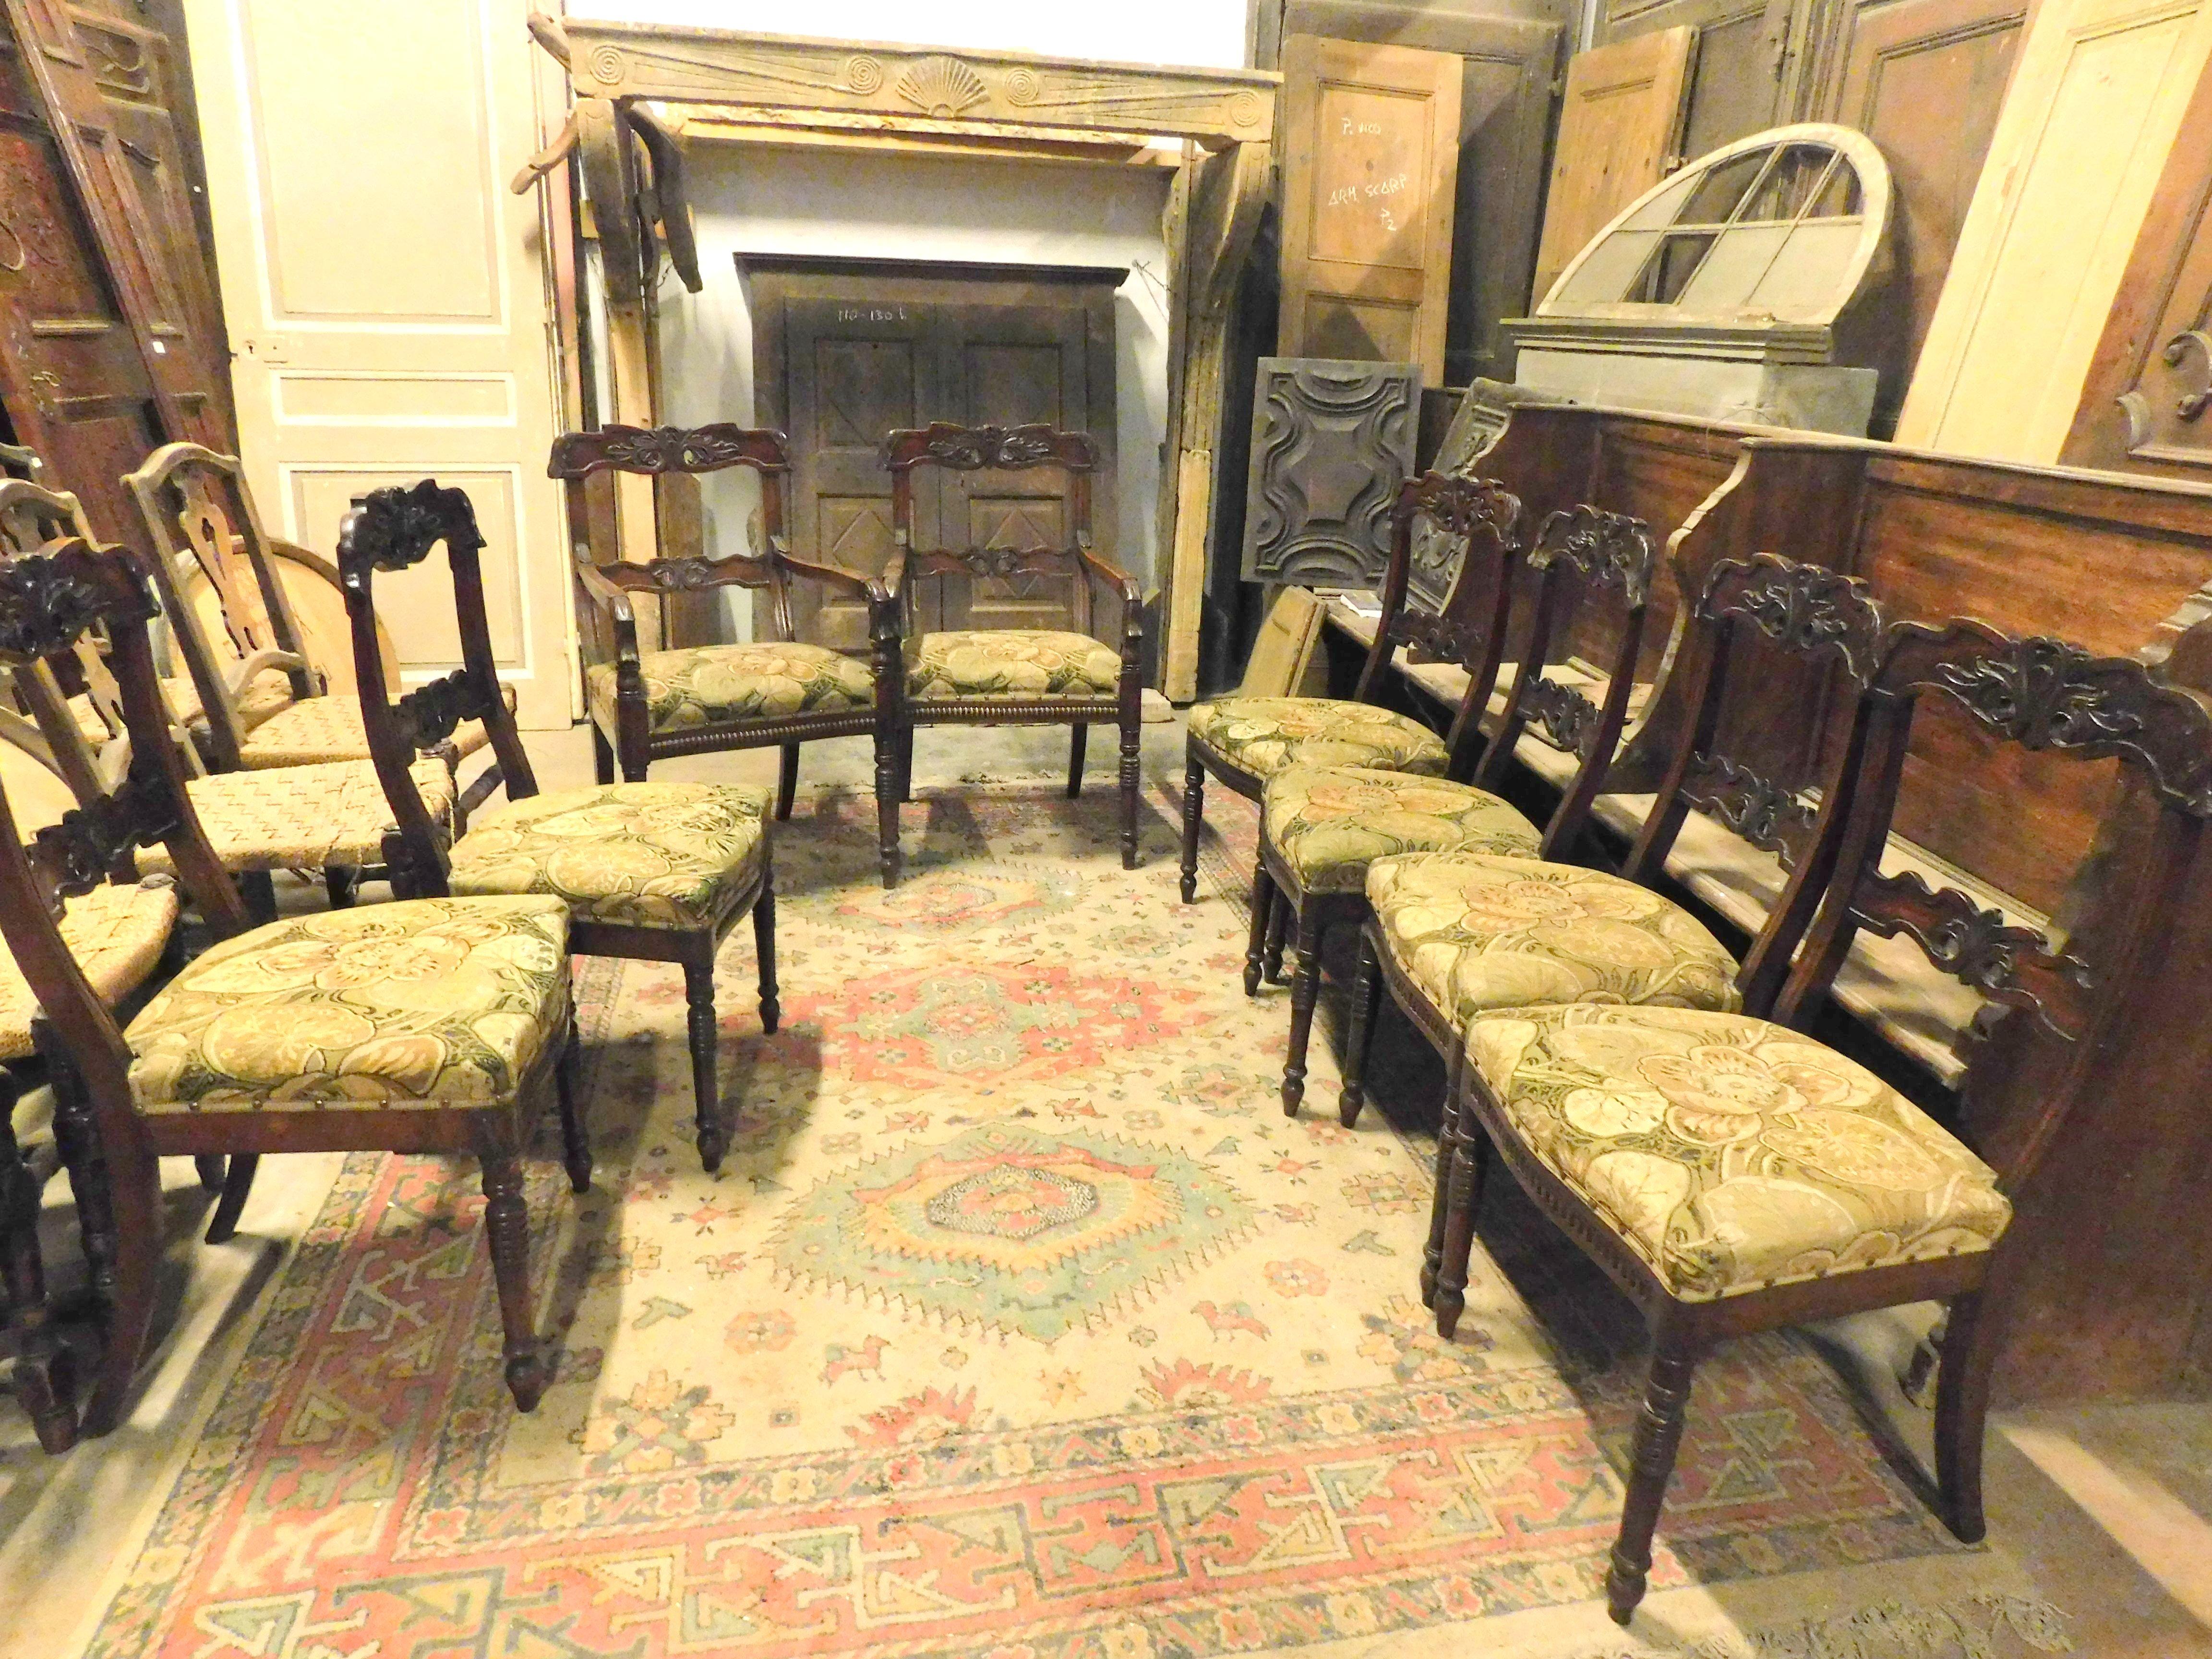 Antique living room in walnut, set consisting of 6 chairs and 2 armchairs, all with fabric in the original seat with typical floral decoration of the time, built for a home living room from the early 1800s, in Piedmont, Italy.
Ideal for setting up